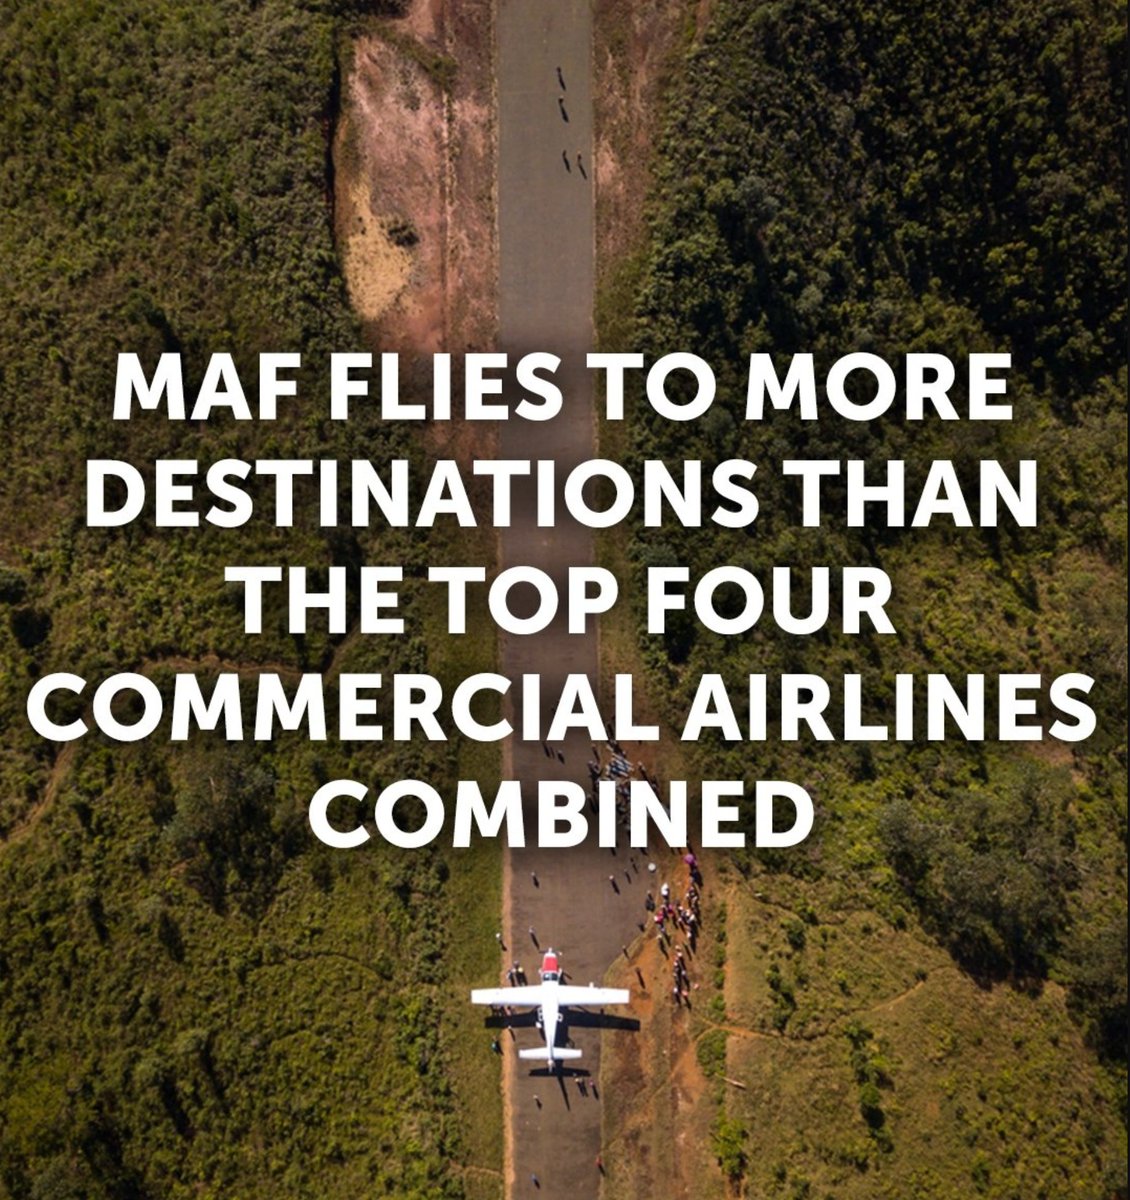 A little known fact about MAF @flying4life